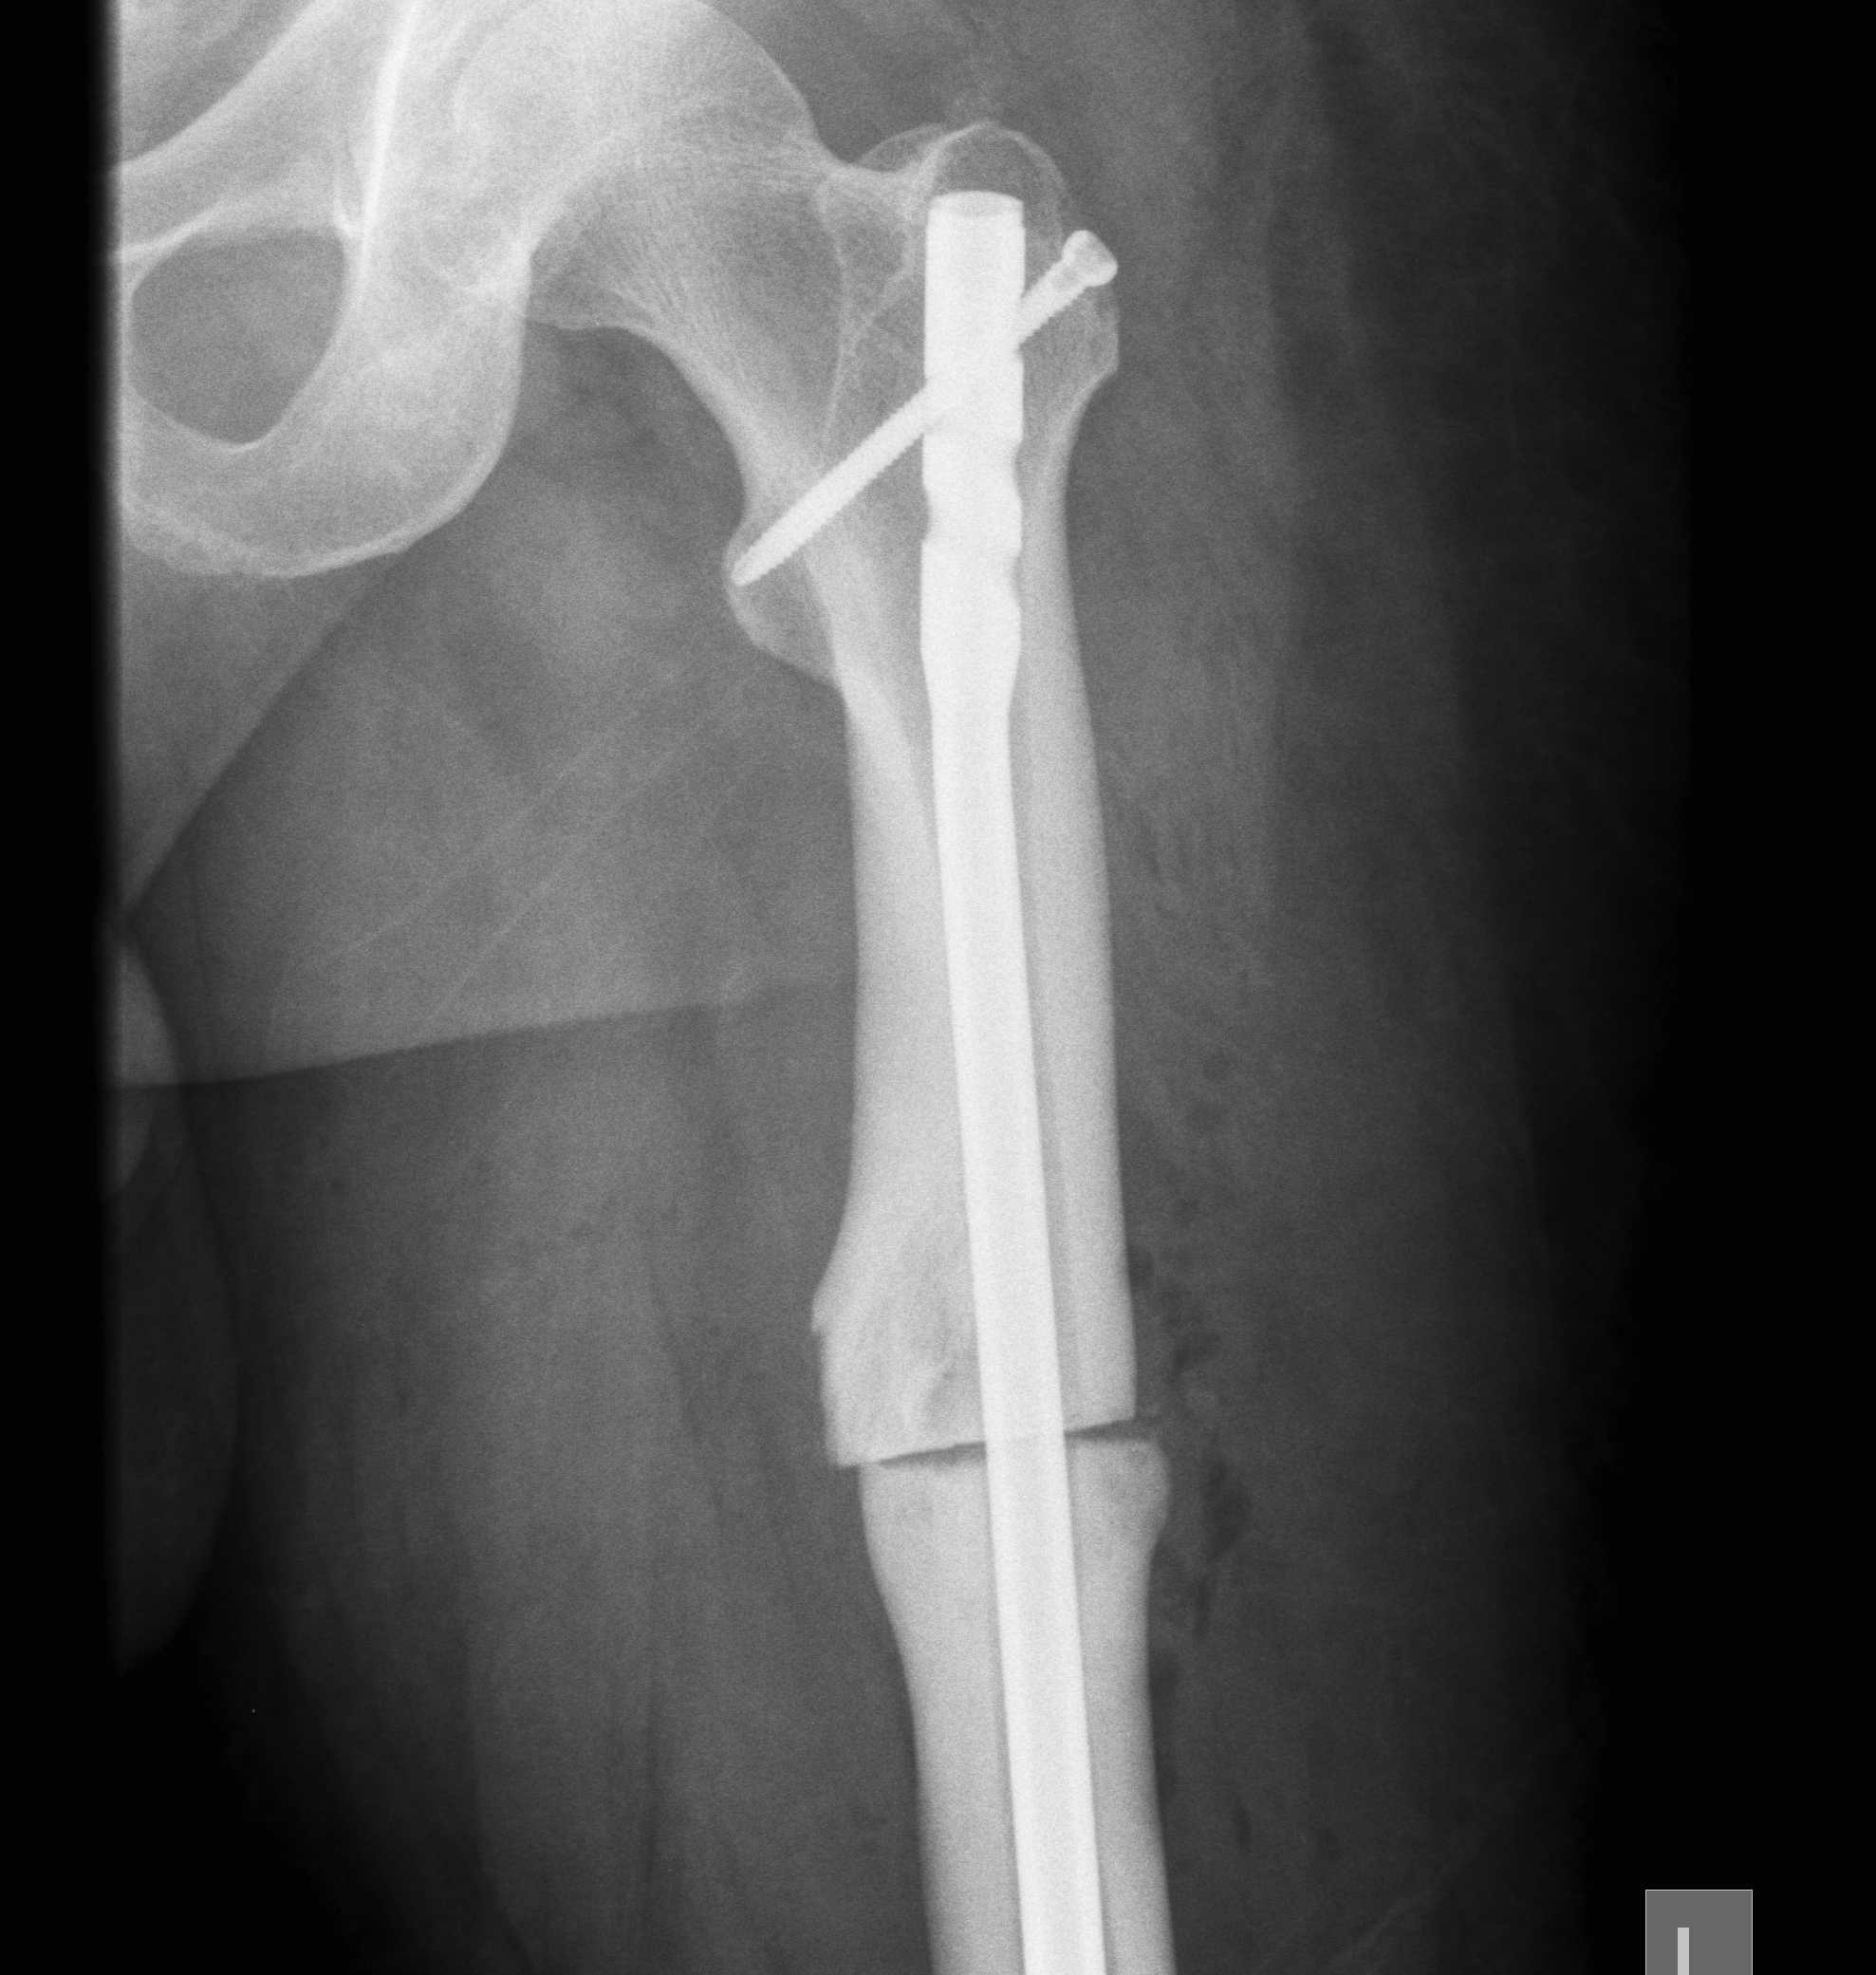 TKR Staged Osteotomy Post op correction